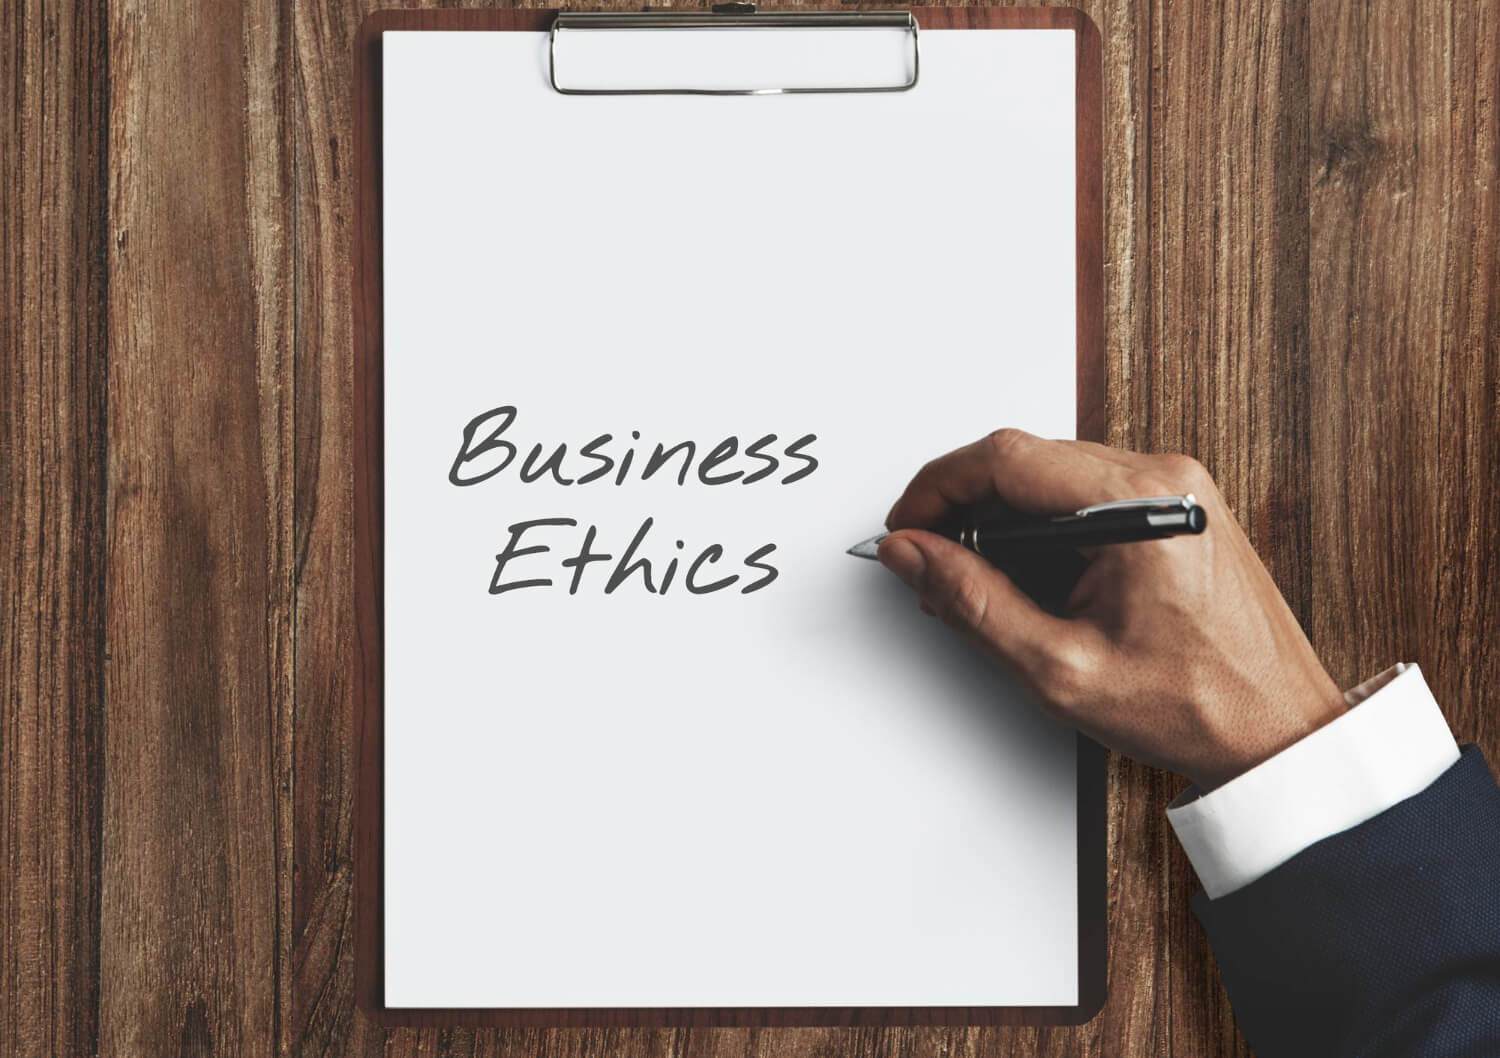 Business-ethics on a notebook